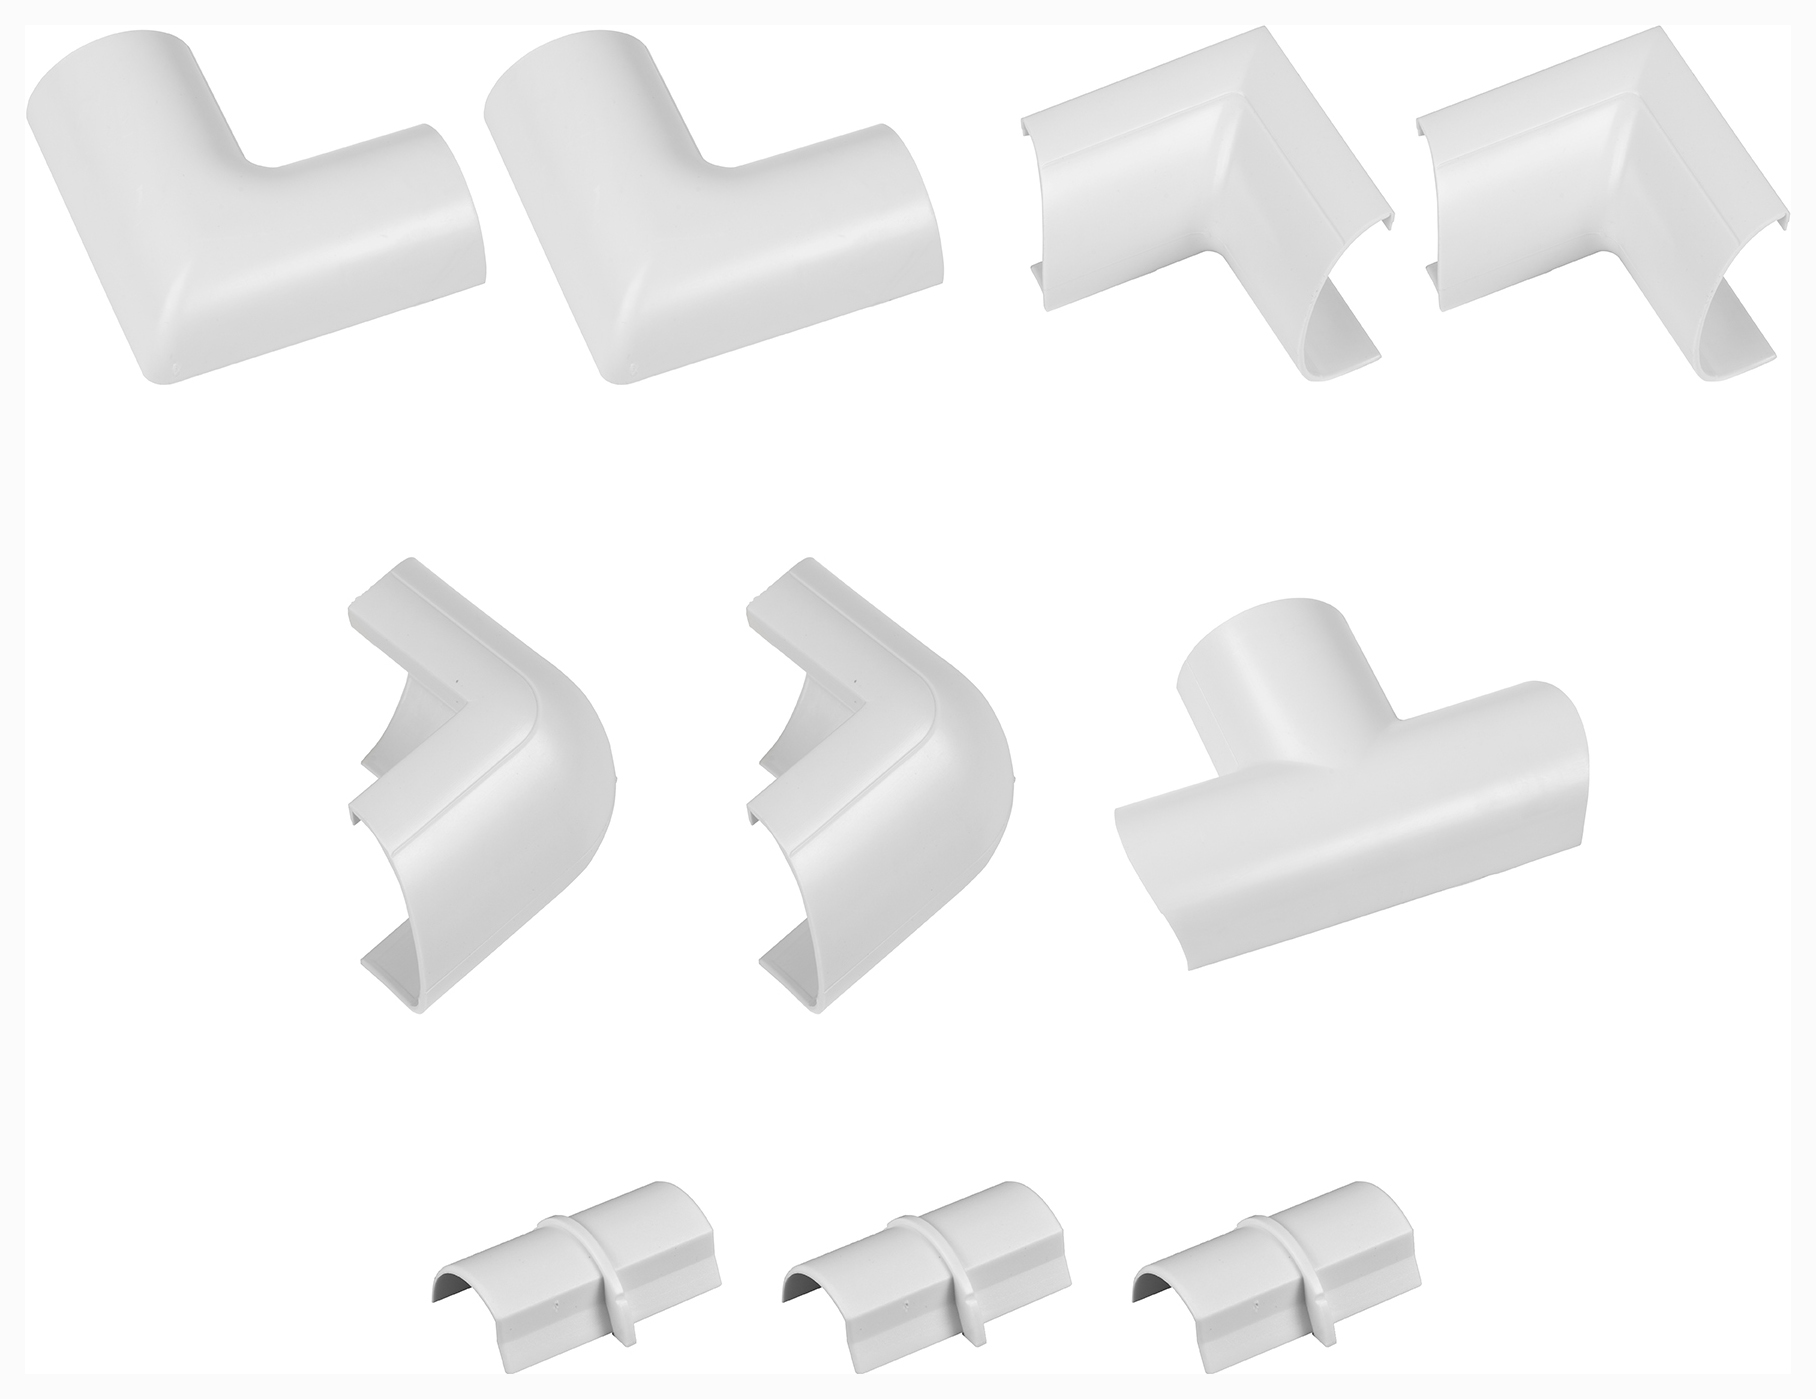 Image of D-Line 30 x 15mm Trunking Accessory Multi-Pack - Pack of 10